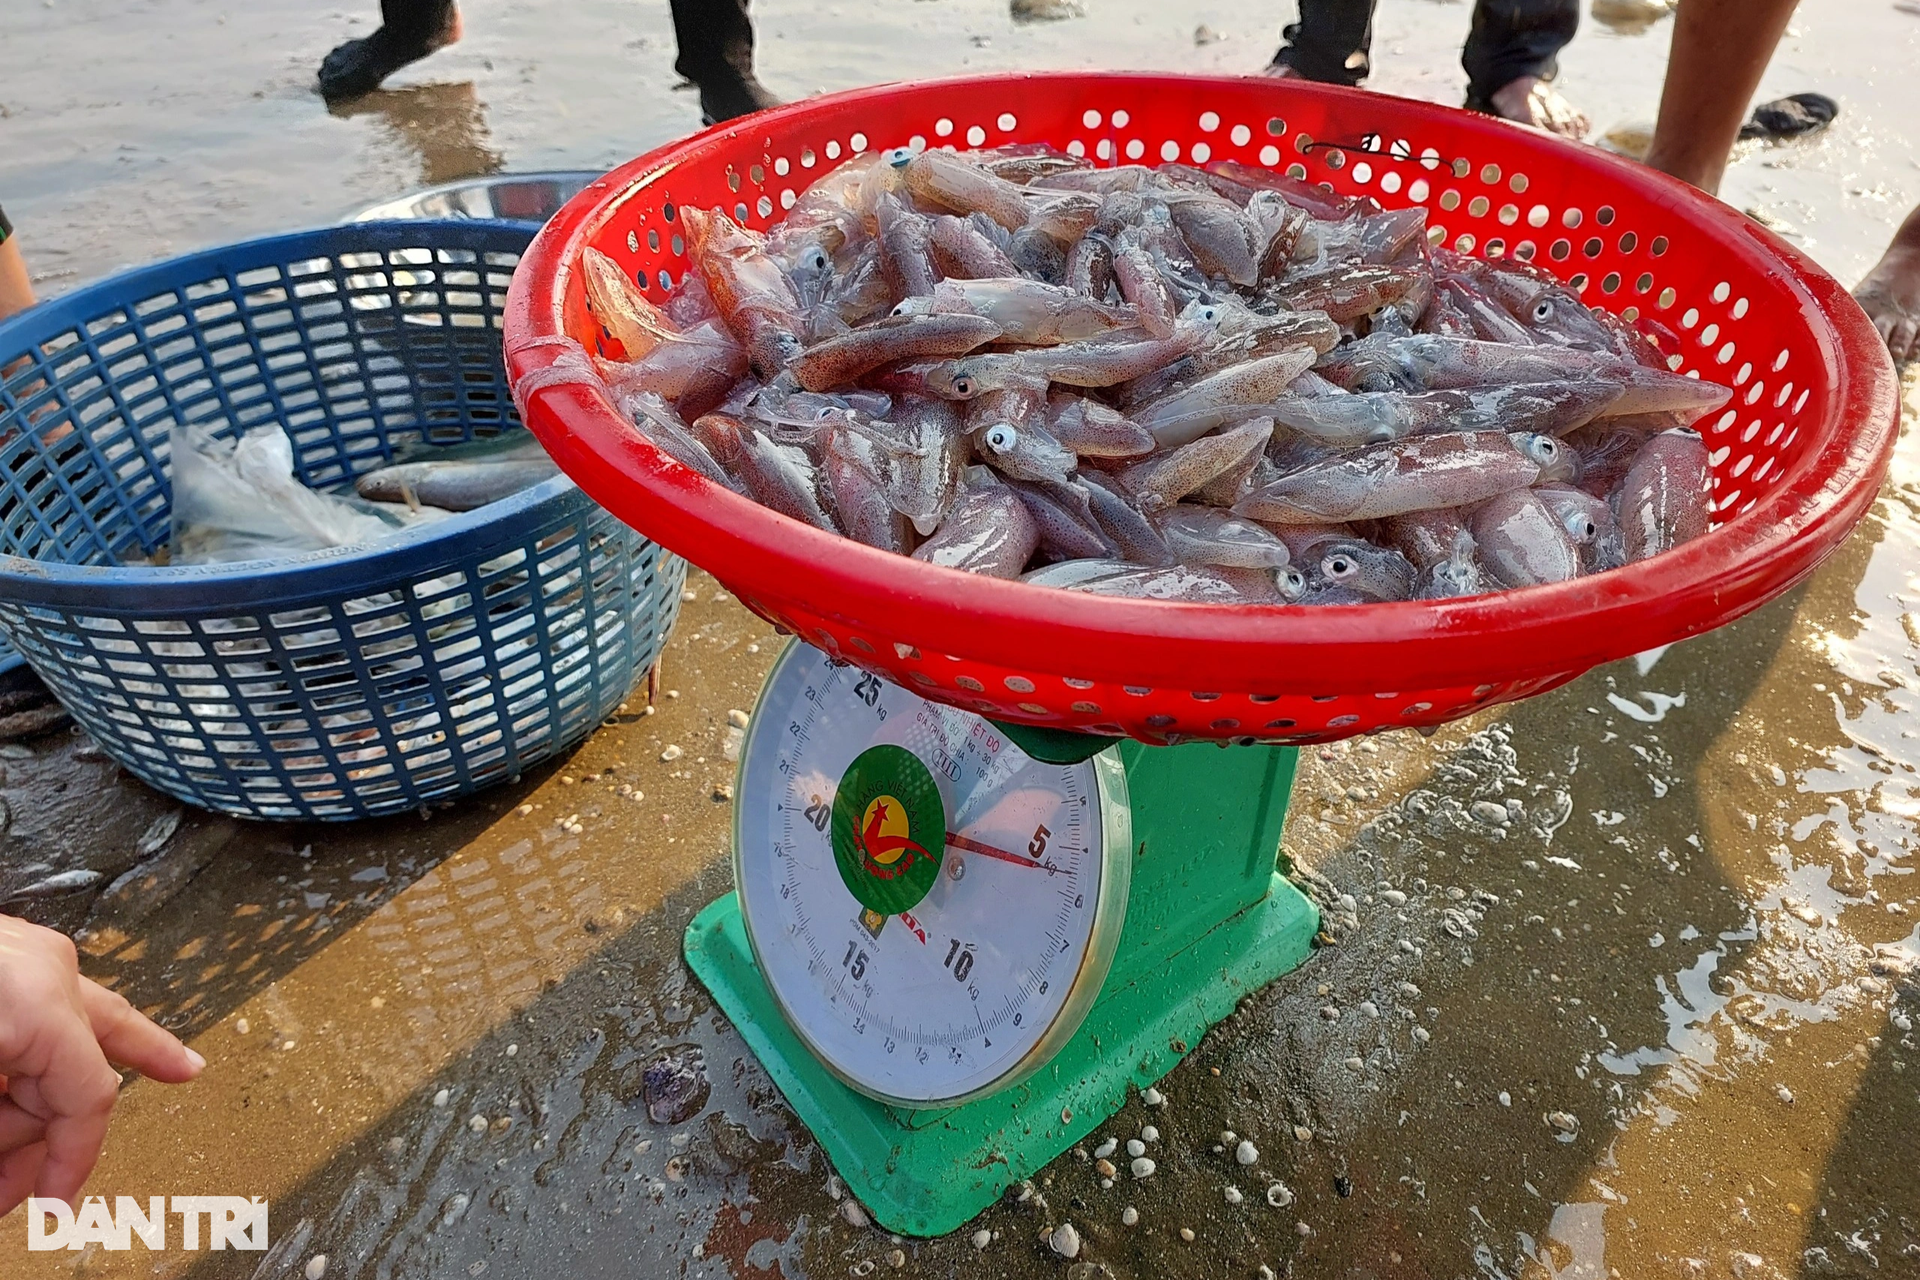 ha tinh province, loc ha district, the group of people “exercising” on the beach also brought back dozens of kilograms of fresh squid